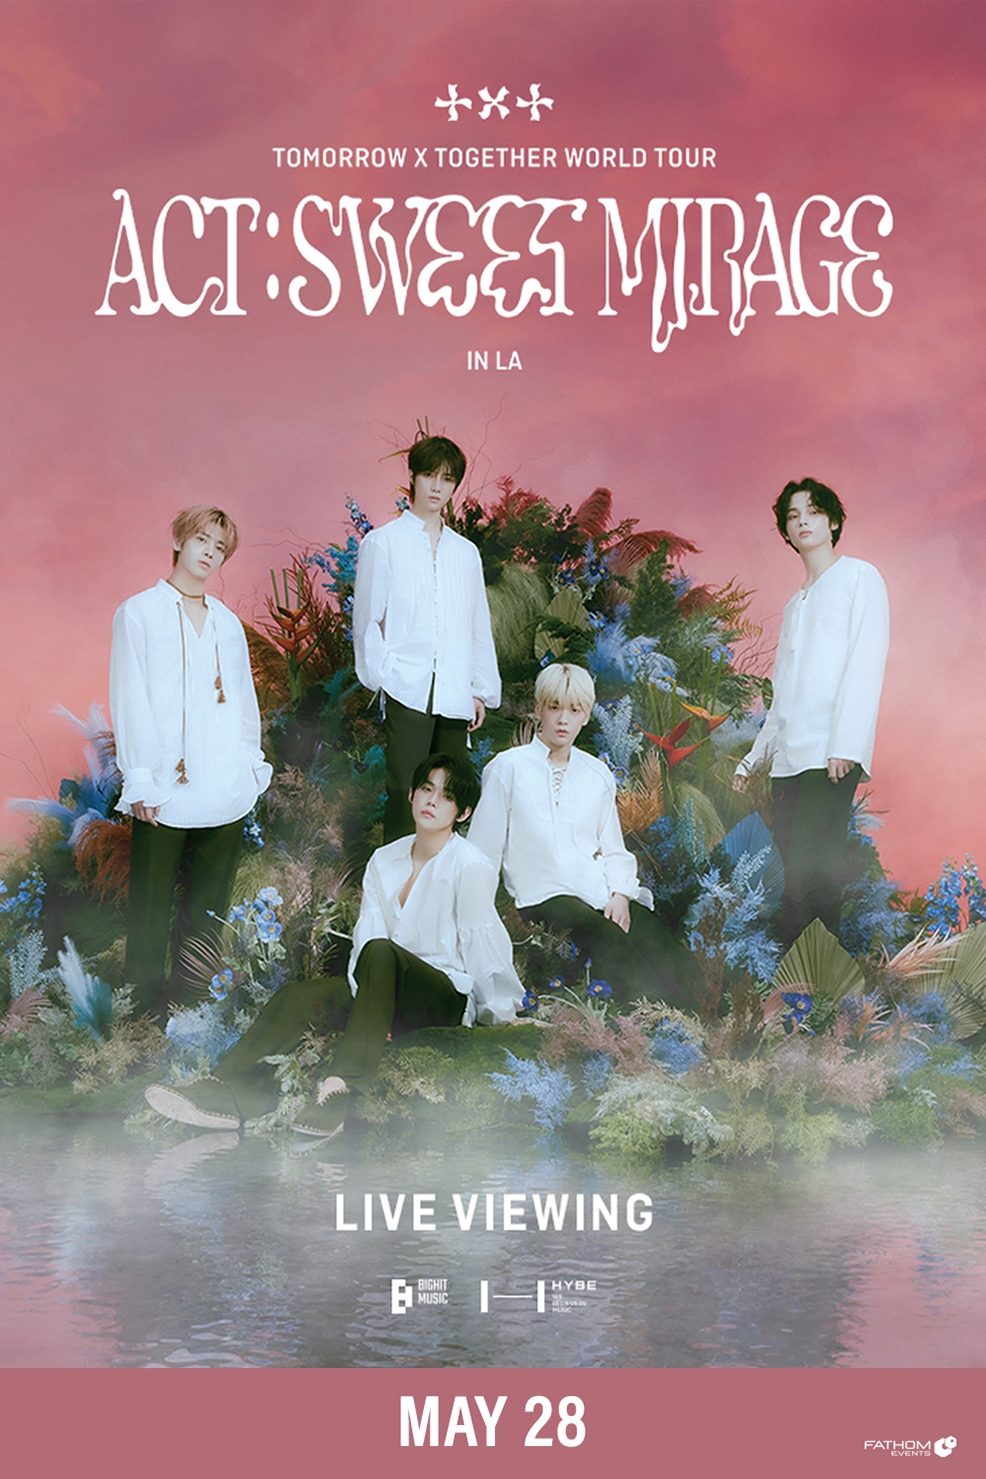 TOMORROW X TOGETHER WORLD TOUR ACT: SWEET LIVE Poster